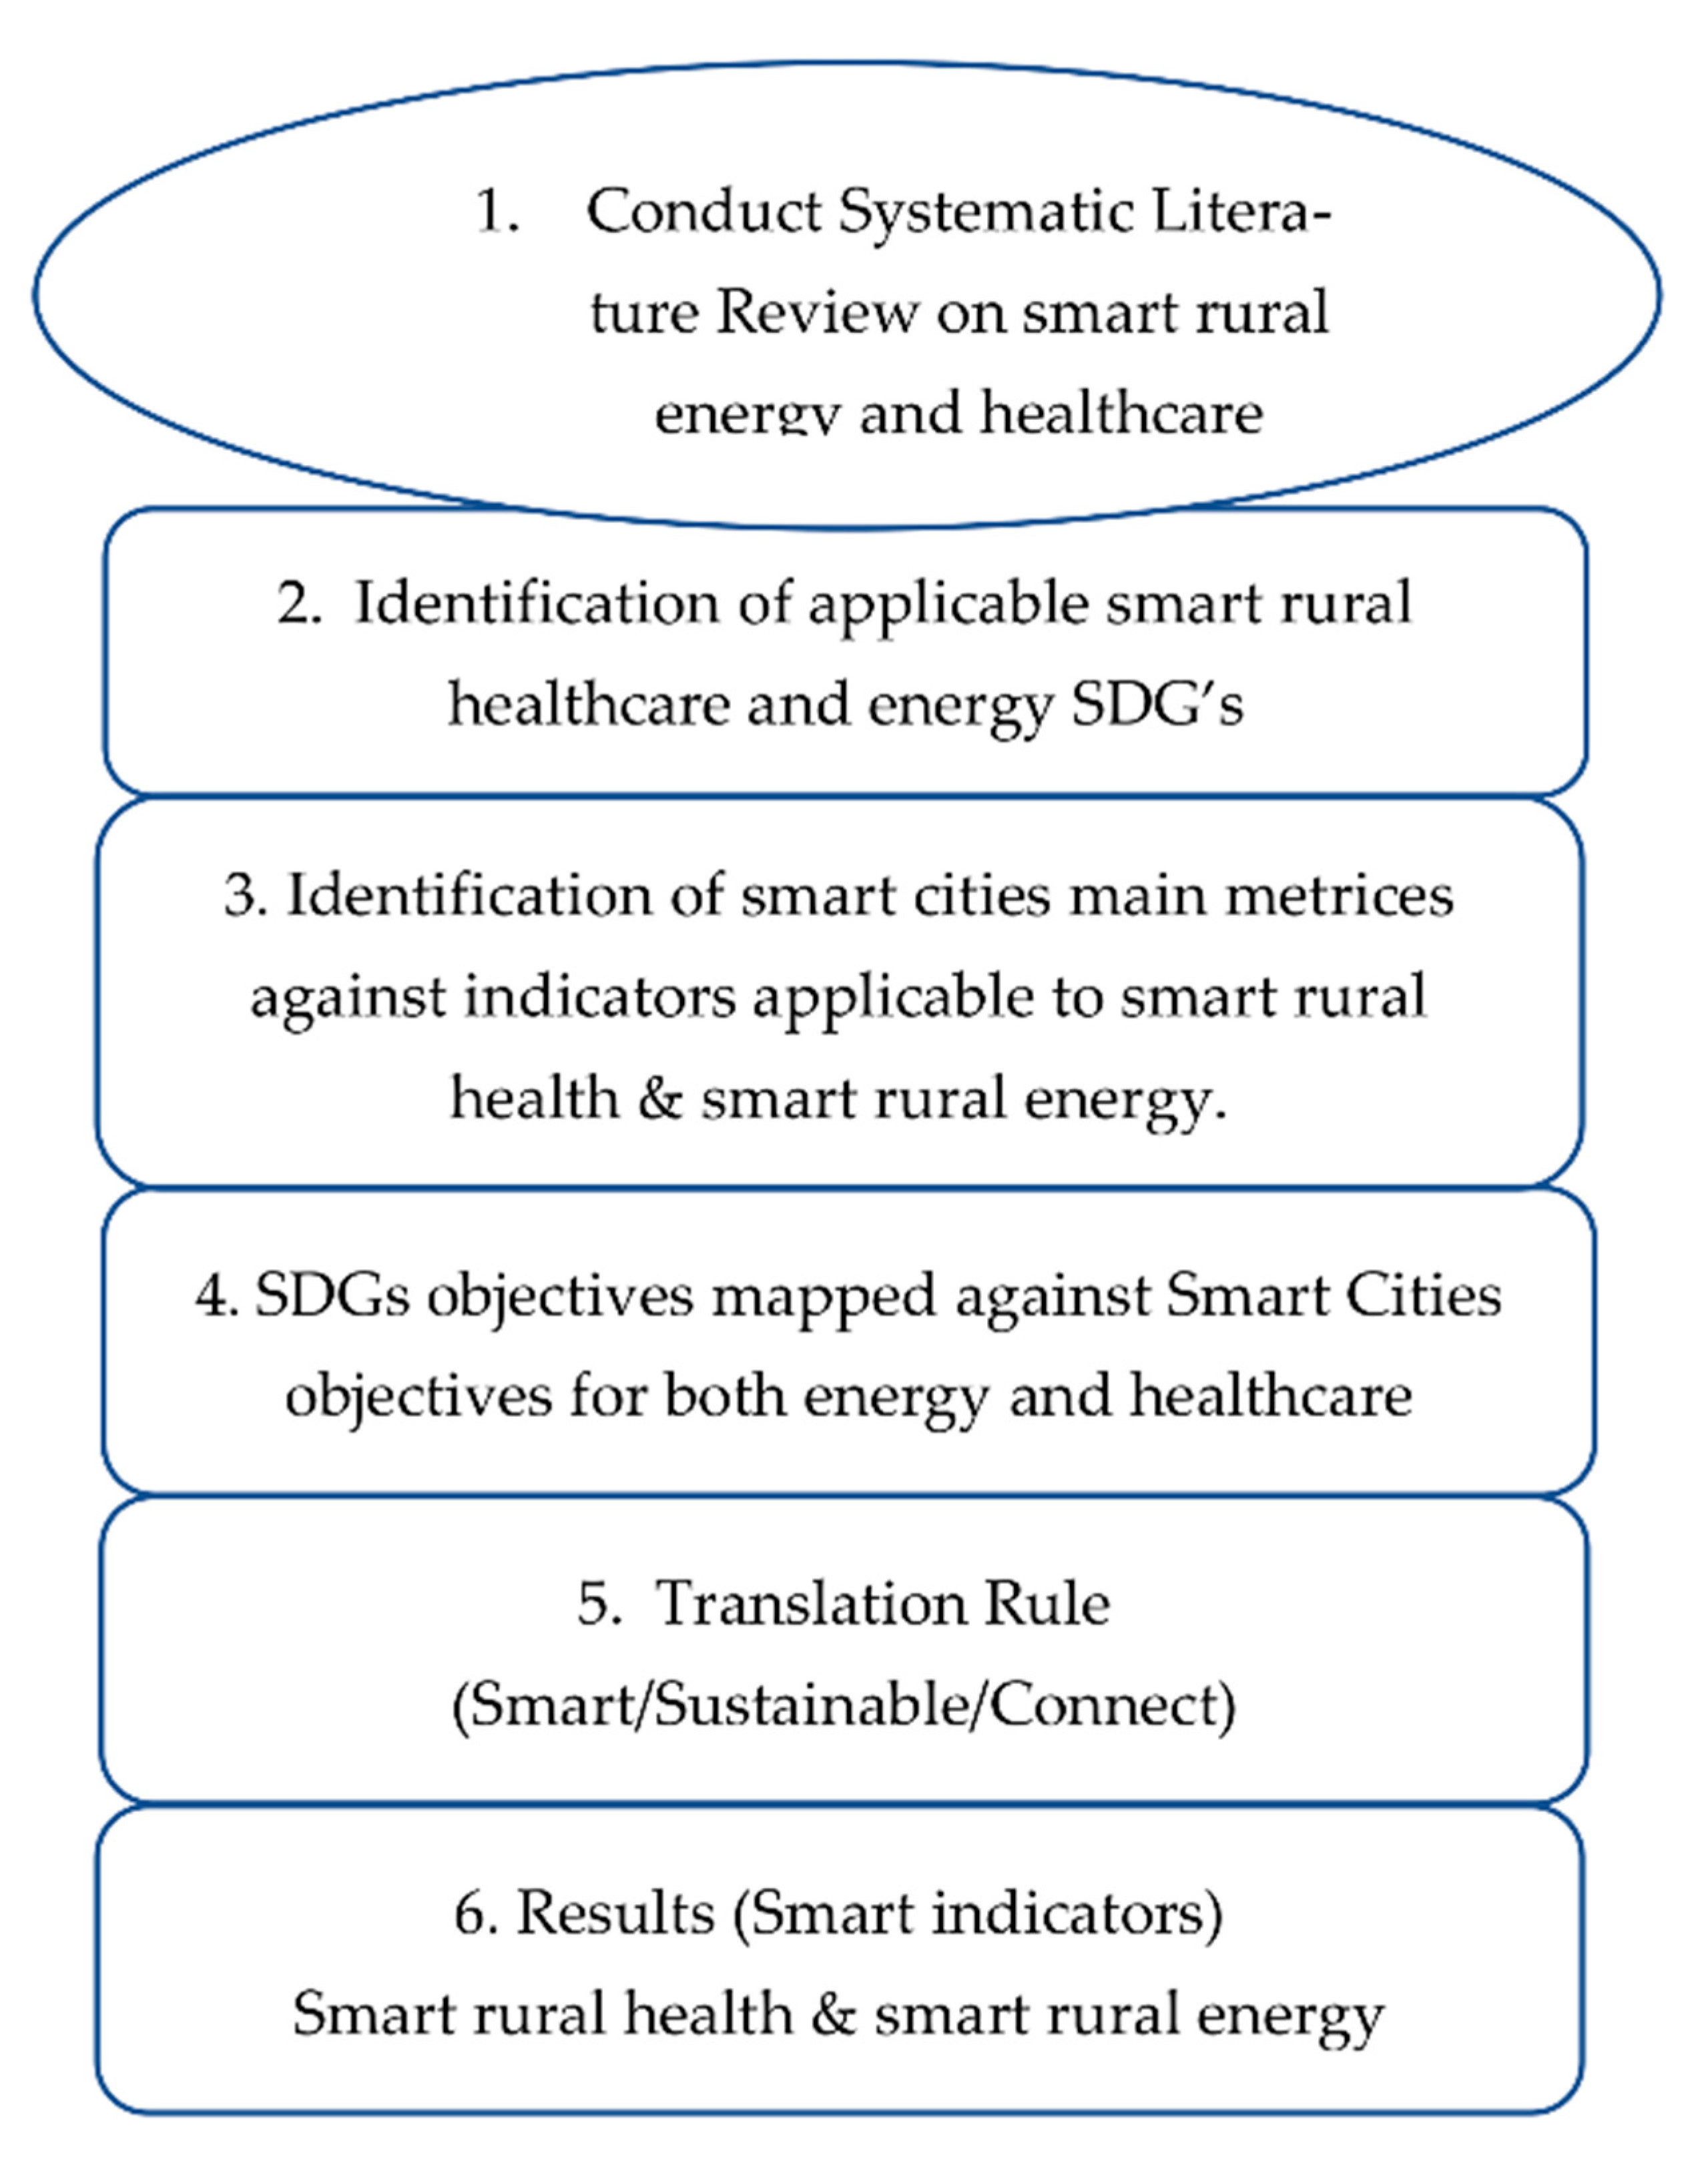 Sustainability | Free Full-Text | Smart Rural Village&rsquo;s Healthcare  and Energy Indicators&mdash;Twin Enablers to Smart Rural Life